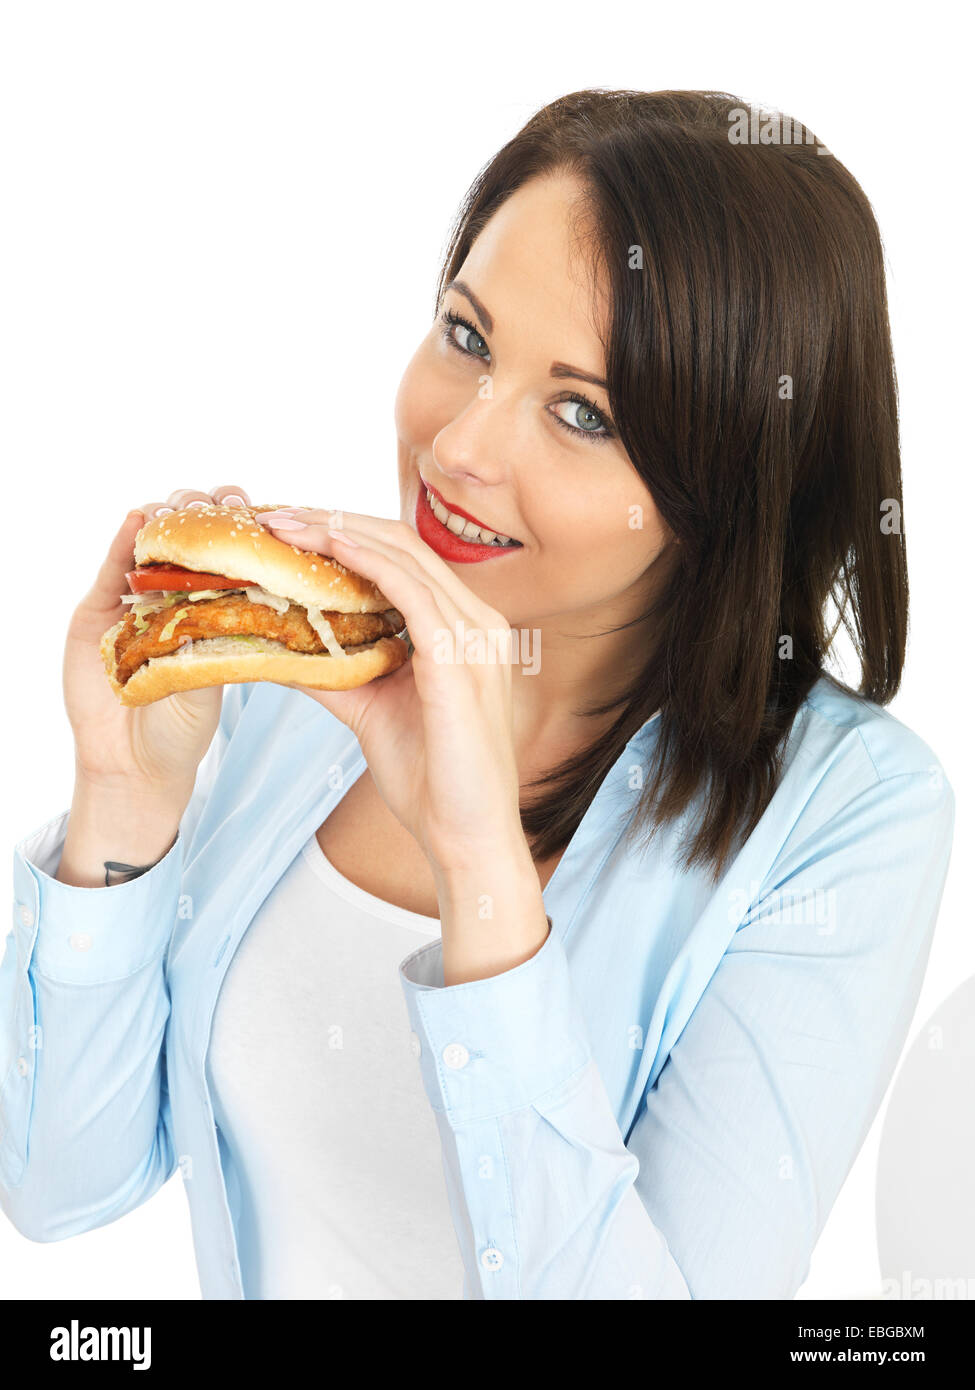 Attractive Twenty Something Young Woman Eating a Chicken Burger Stock Photo